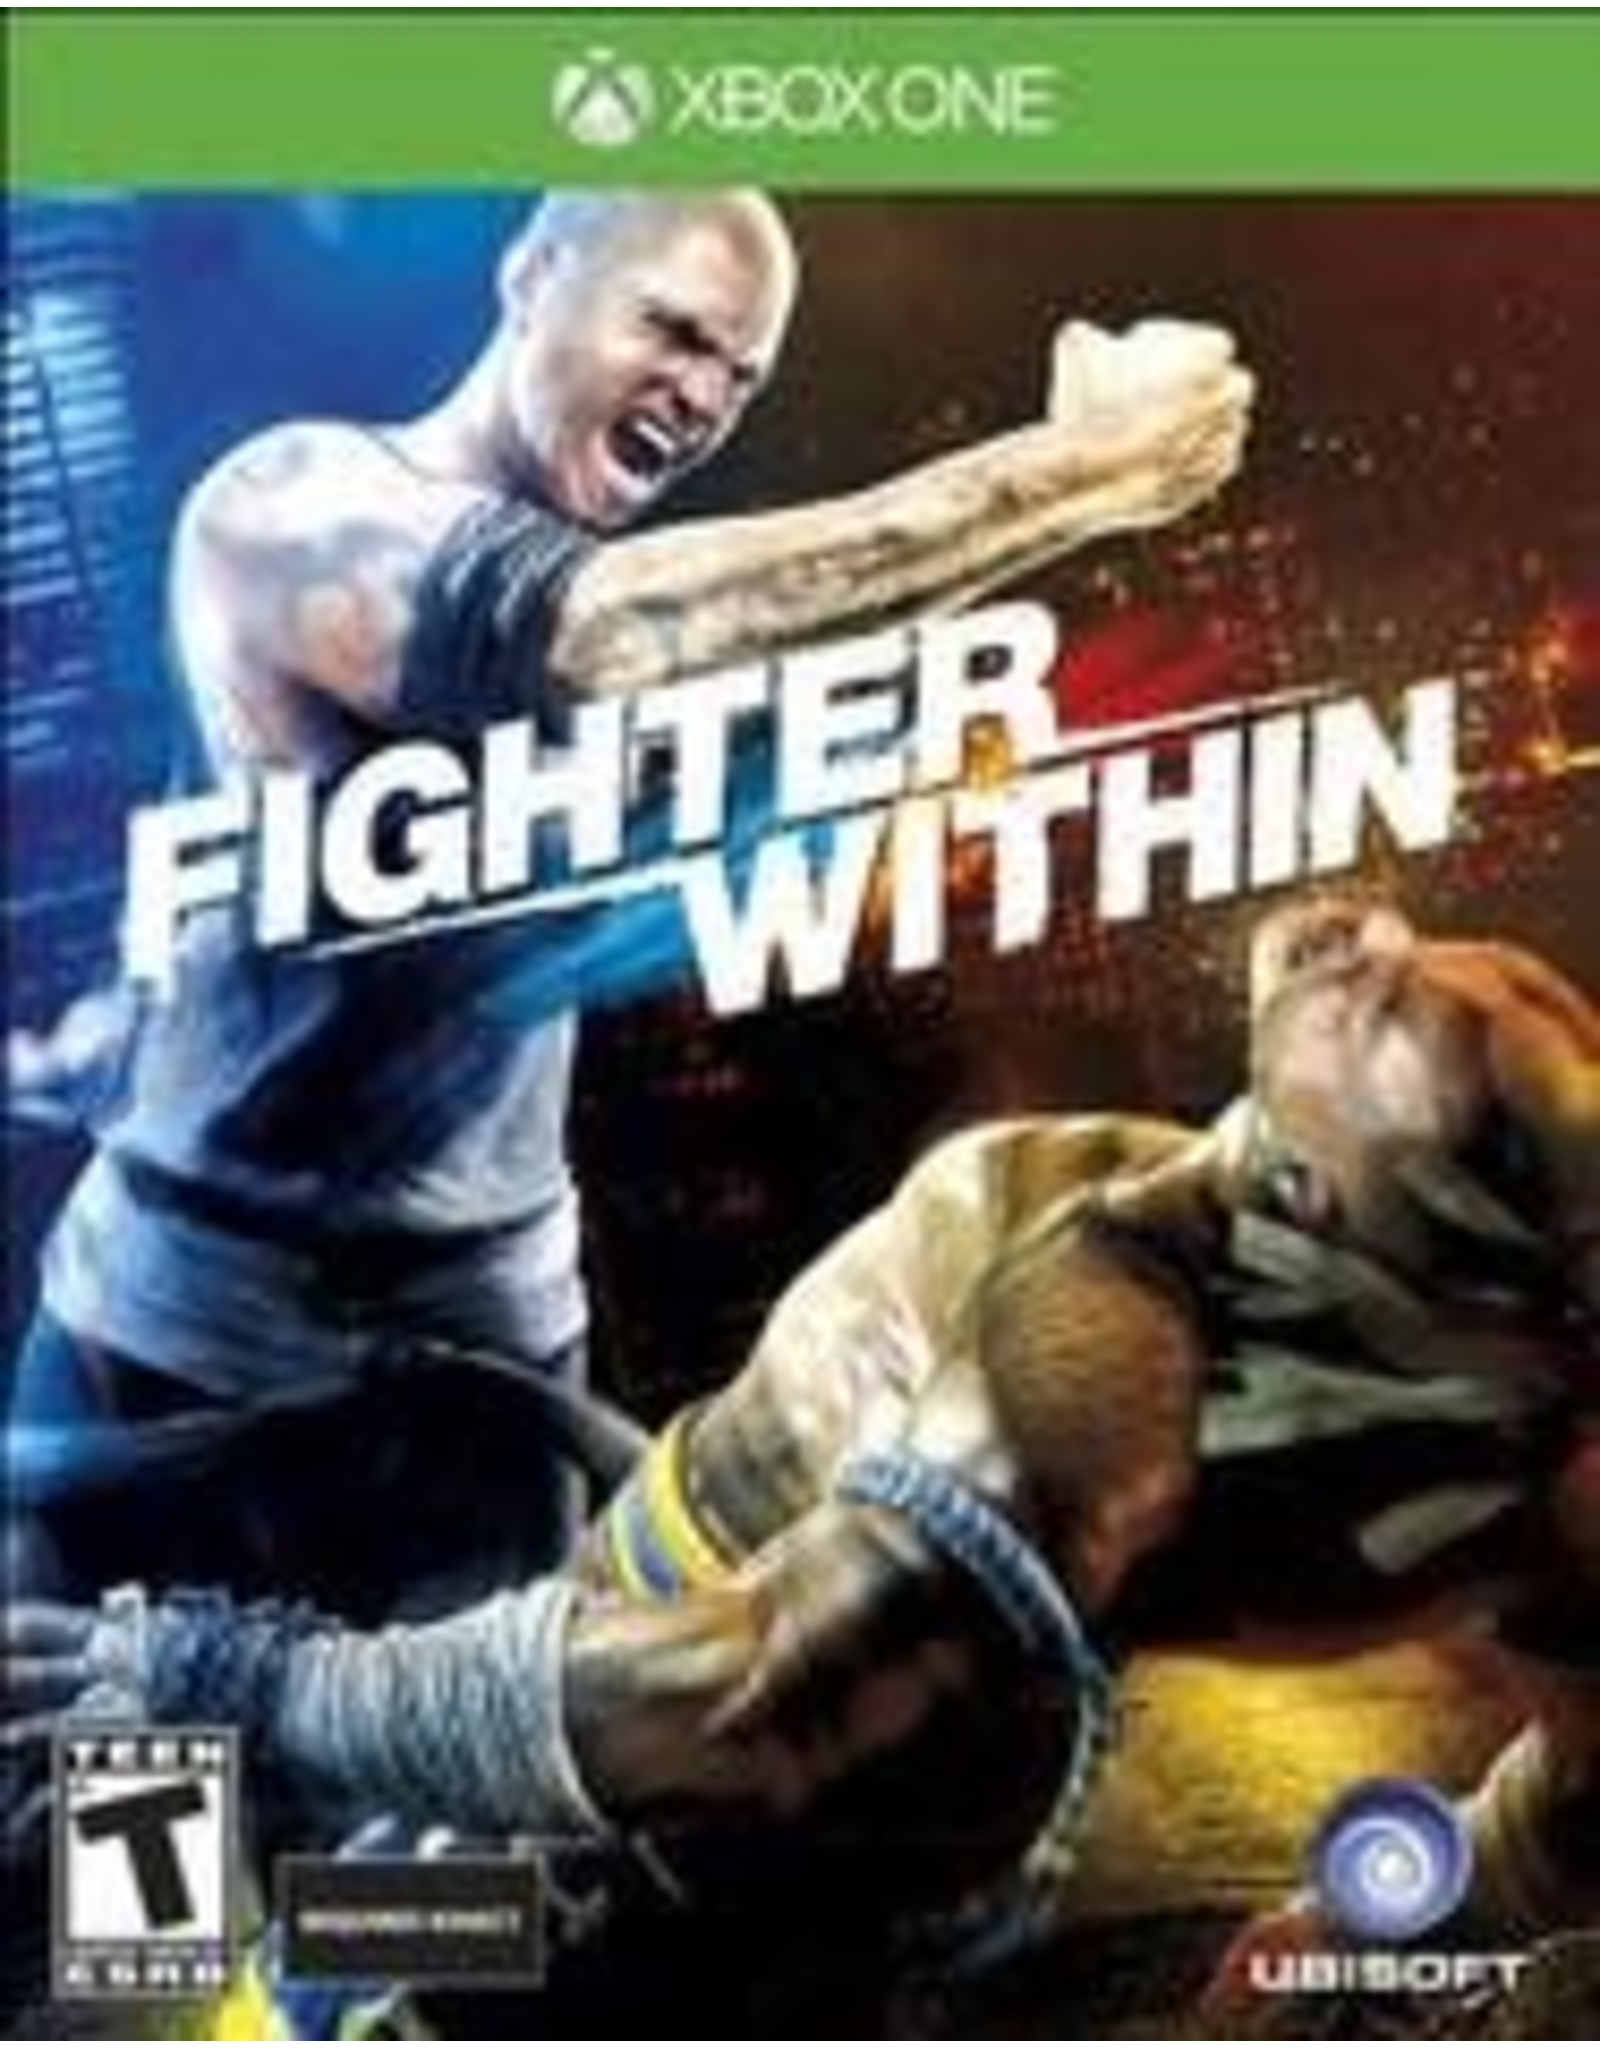 Xbox One Fighter Within (CiB)